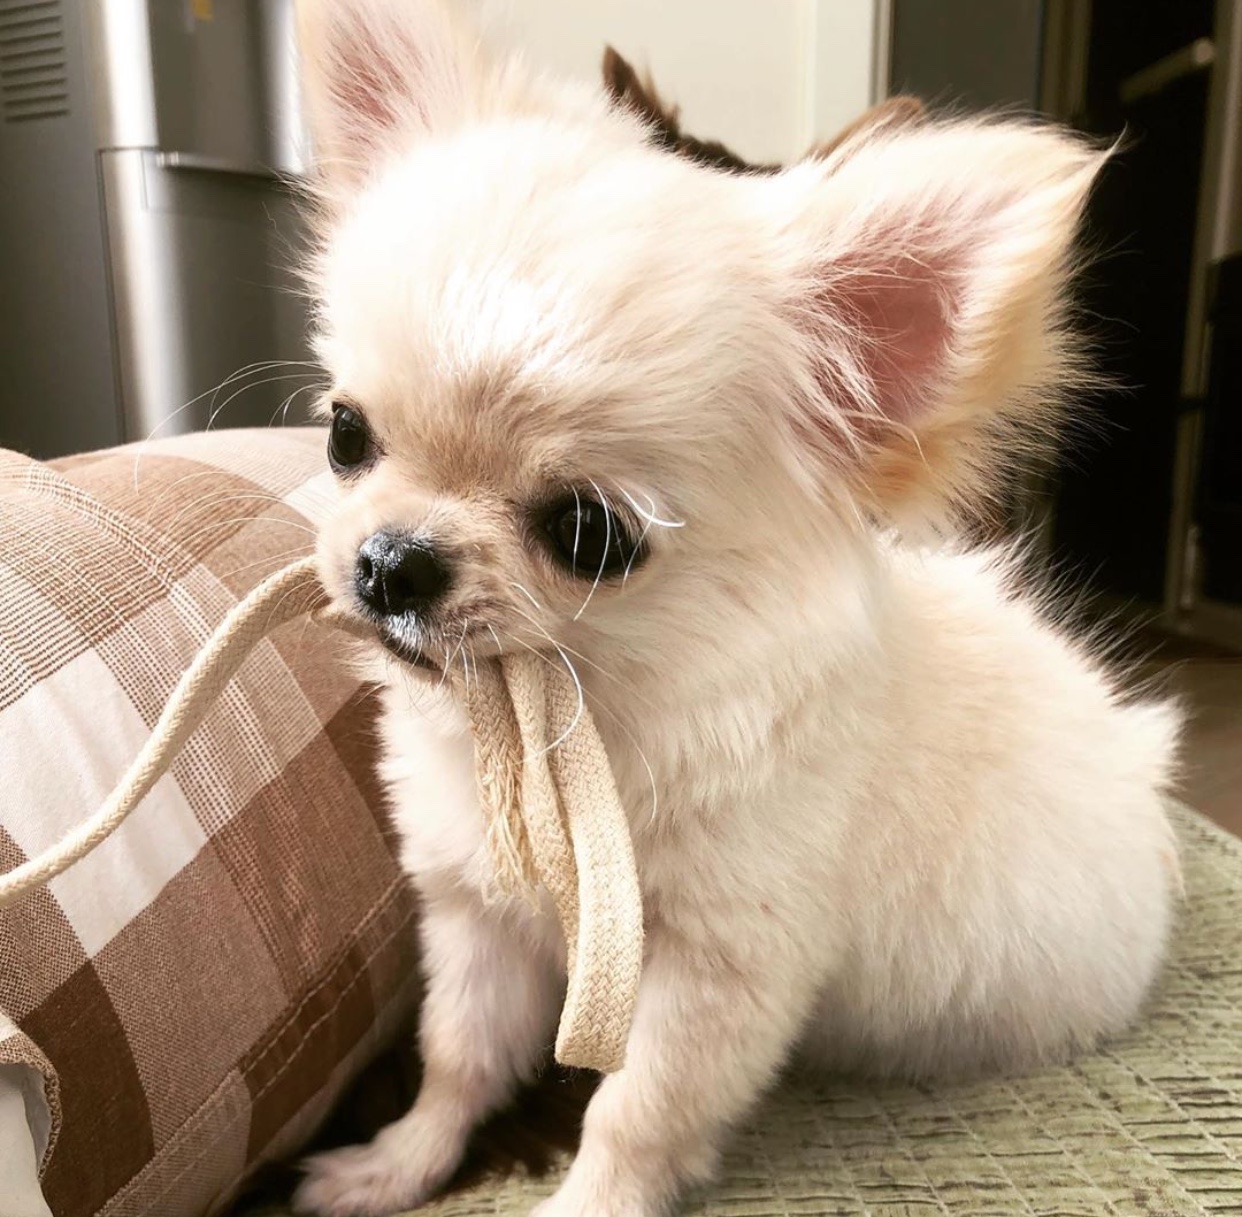 Chihuahua sitting on the floor with a shoelace in its mouth